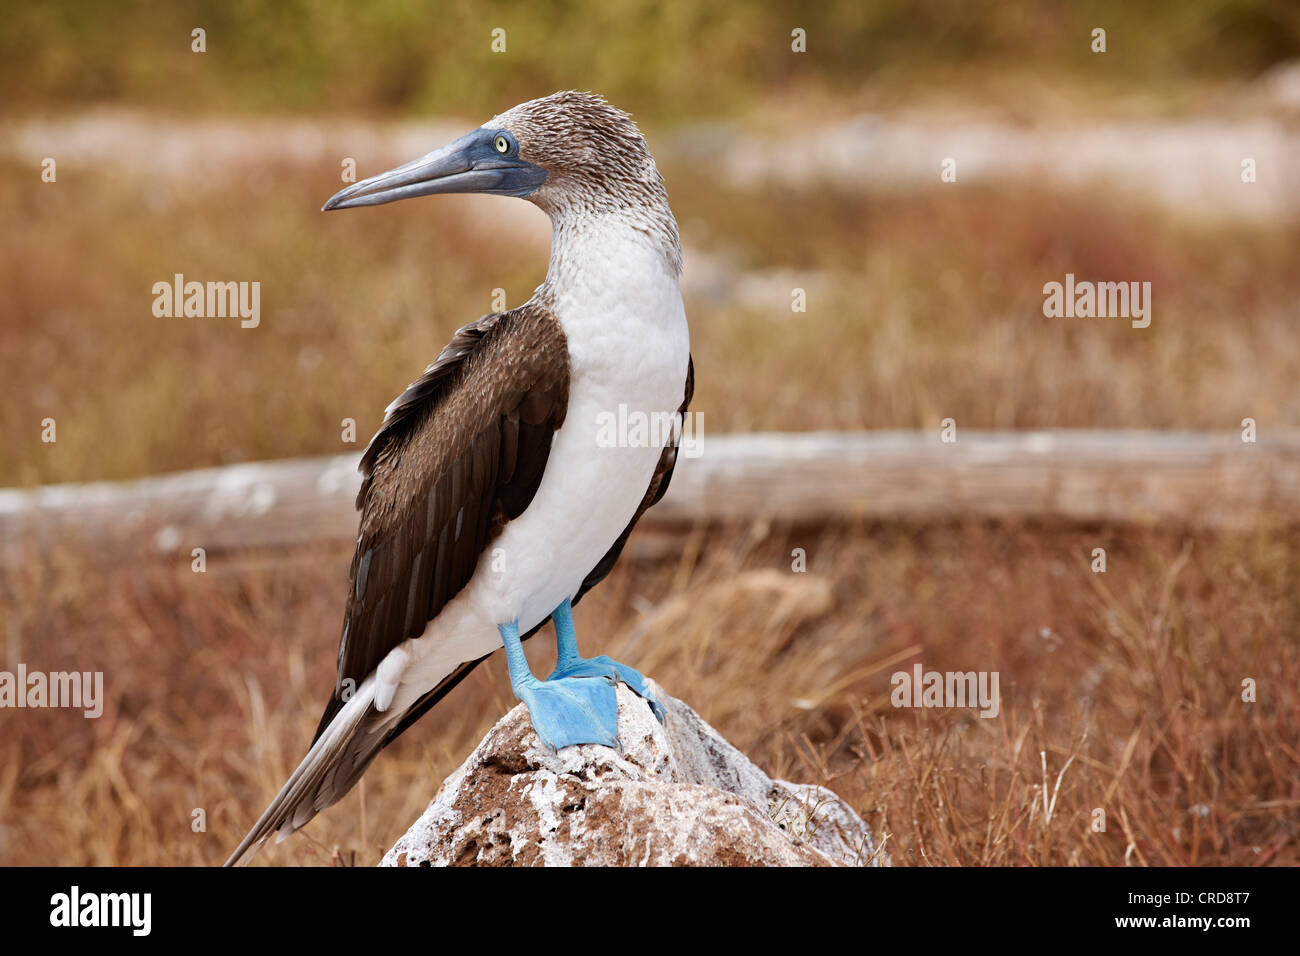 Blue-footed Booby (Sula nebouxii) on a stone, North Seymour Island, Galapagos Islands Stock Photo